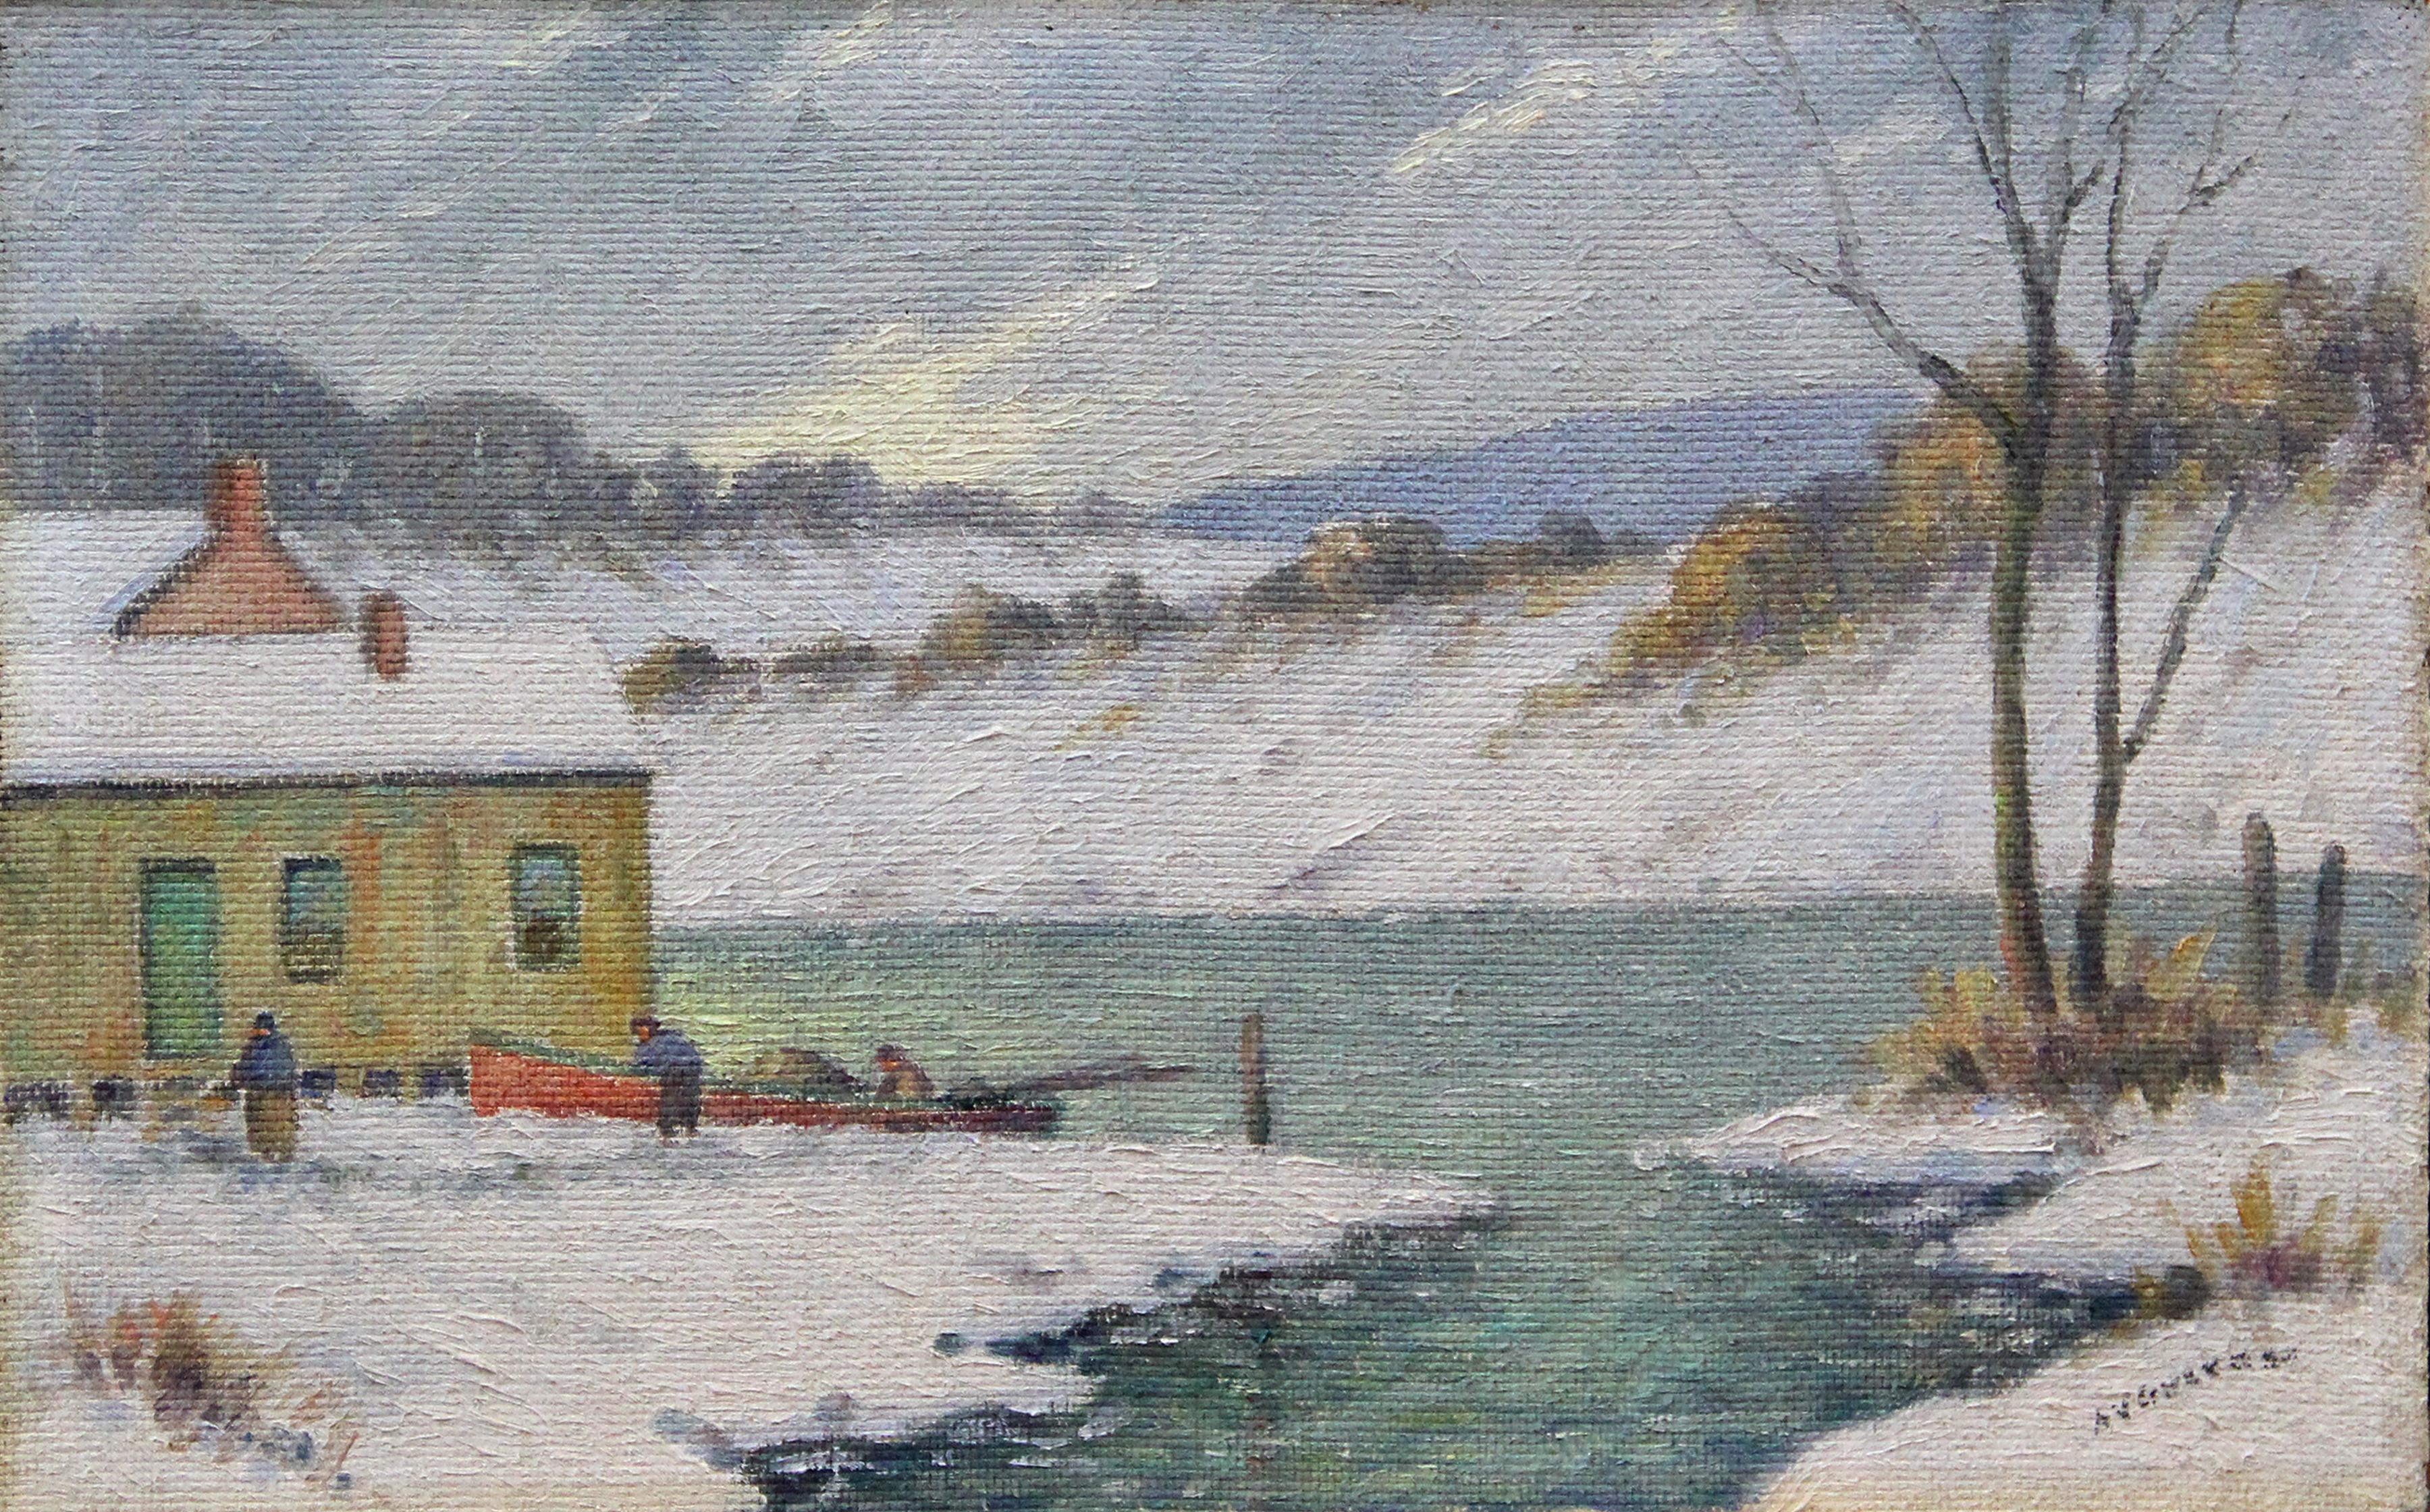 Winter Fishermen, American Impressionist Snowy Landscape by the River - Painting by Albert Van Nesse Greene